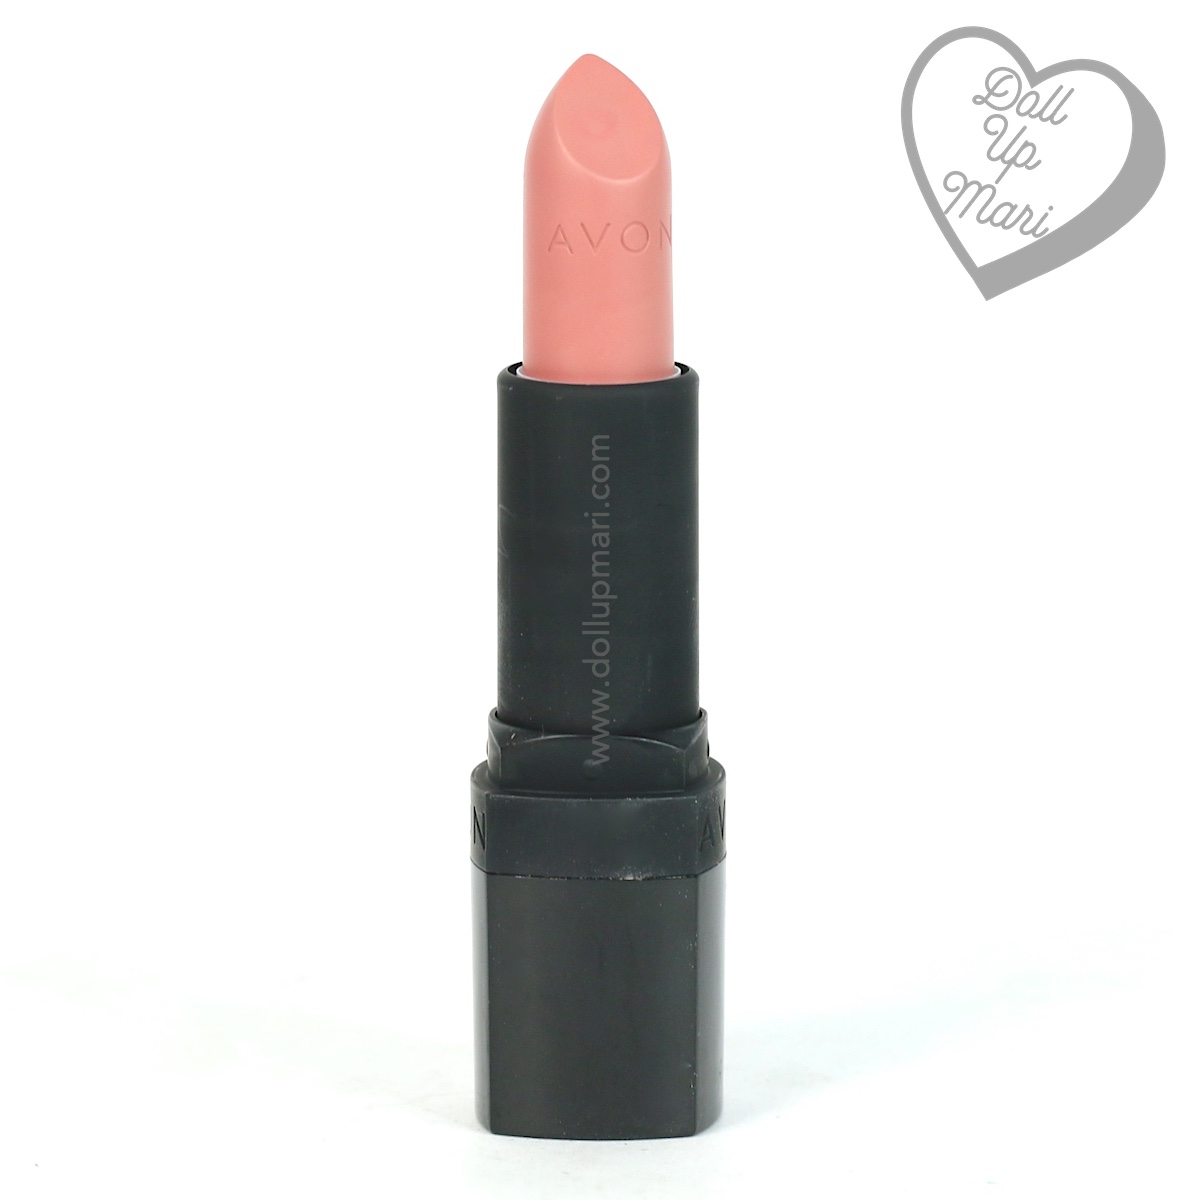 pack shot of Rouged Perfection shade of AVON Perfectly Matte Lipstick